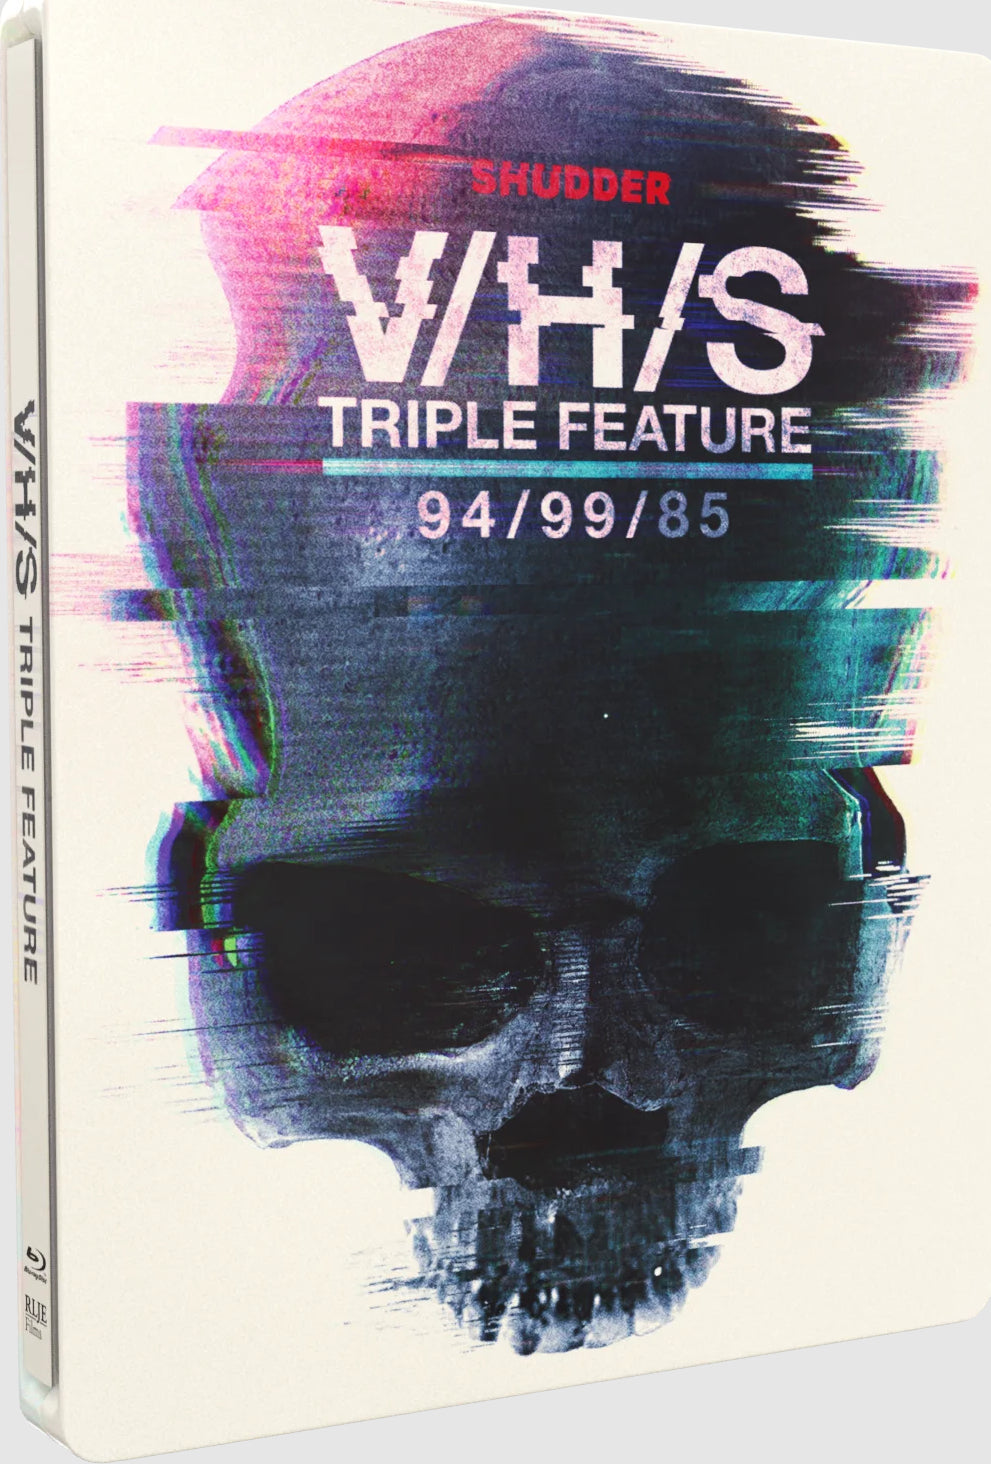 V/H/S/TRIPLE FEATURE (LIMITED EDITION) BLU-RAY STEELBOOK